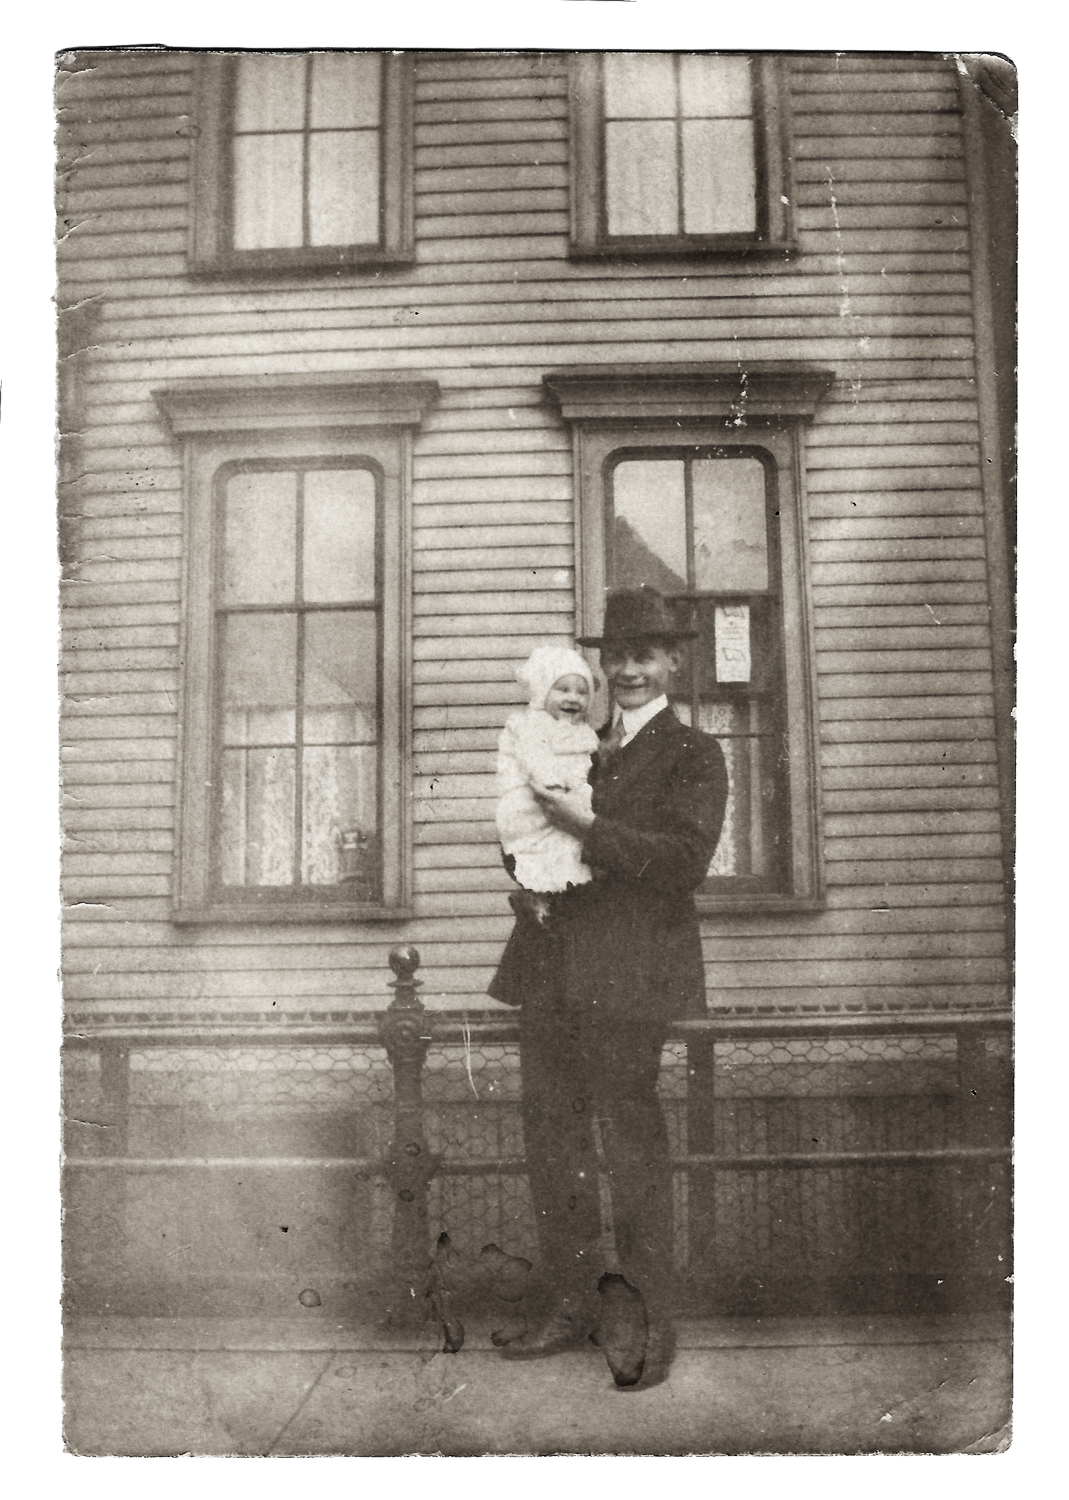 Dad and Herb, 1918, in front of 1703 Burling Street